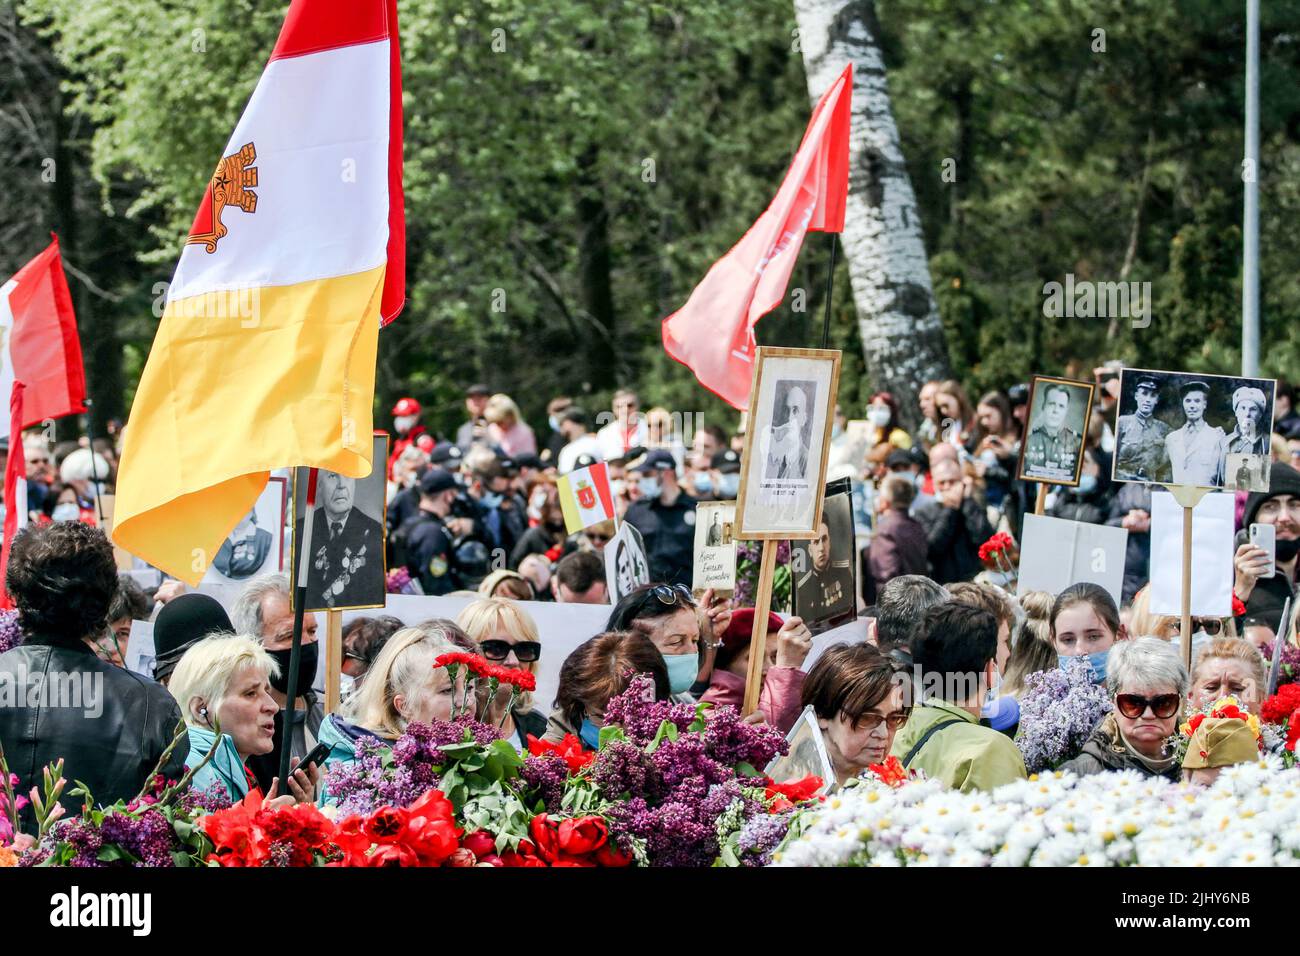 Odessa, Ukraine. 09th May, 2021. Participants of the 'Immortal Regiment' are seen carrying flowers, red flags and portraits of their relatives who fought in the Second World War. On May 9, 2021, Ukraine celebrated the 76th anniversary of the victory over Nazism in World War II; people honored the memory of the dead by laying flowers at the monument to the Unknown Sailor on the Walk of Fame in the park. T.G. Shevchenko. (Photo by Viacheslav Onyshchenko/SOPA Images/Sipa USA) Credit: Sipa USA/Alamy Live News Stock Photo